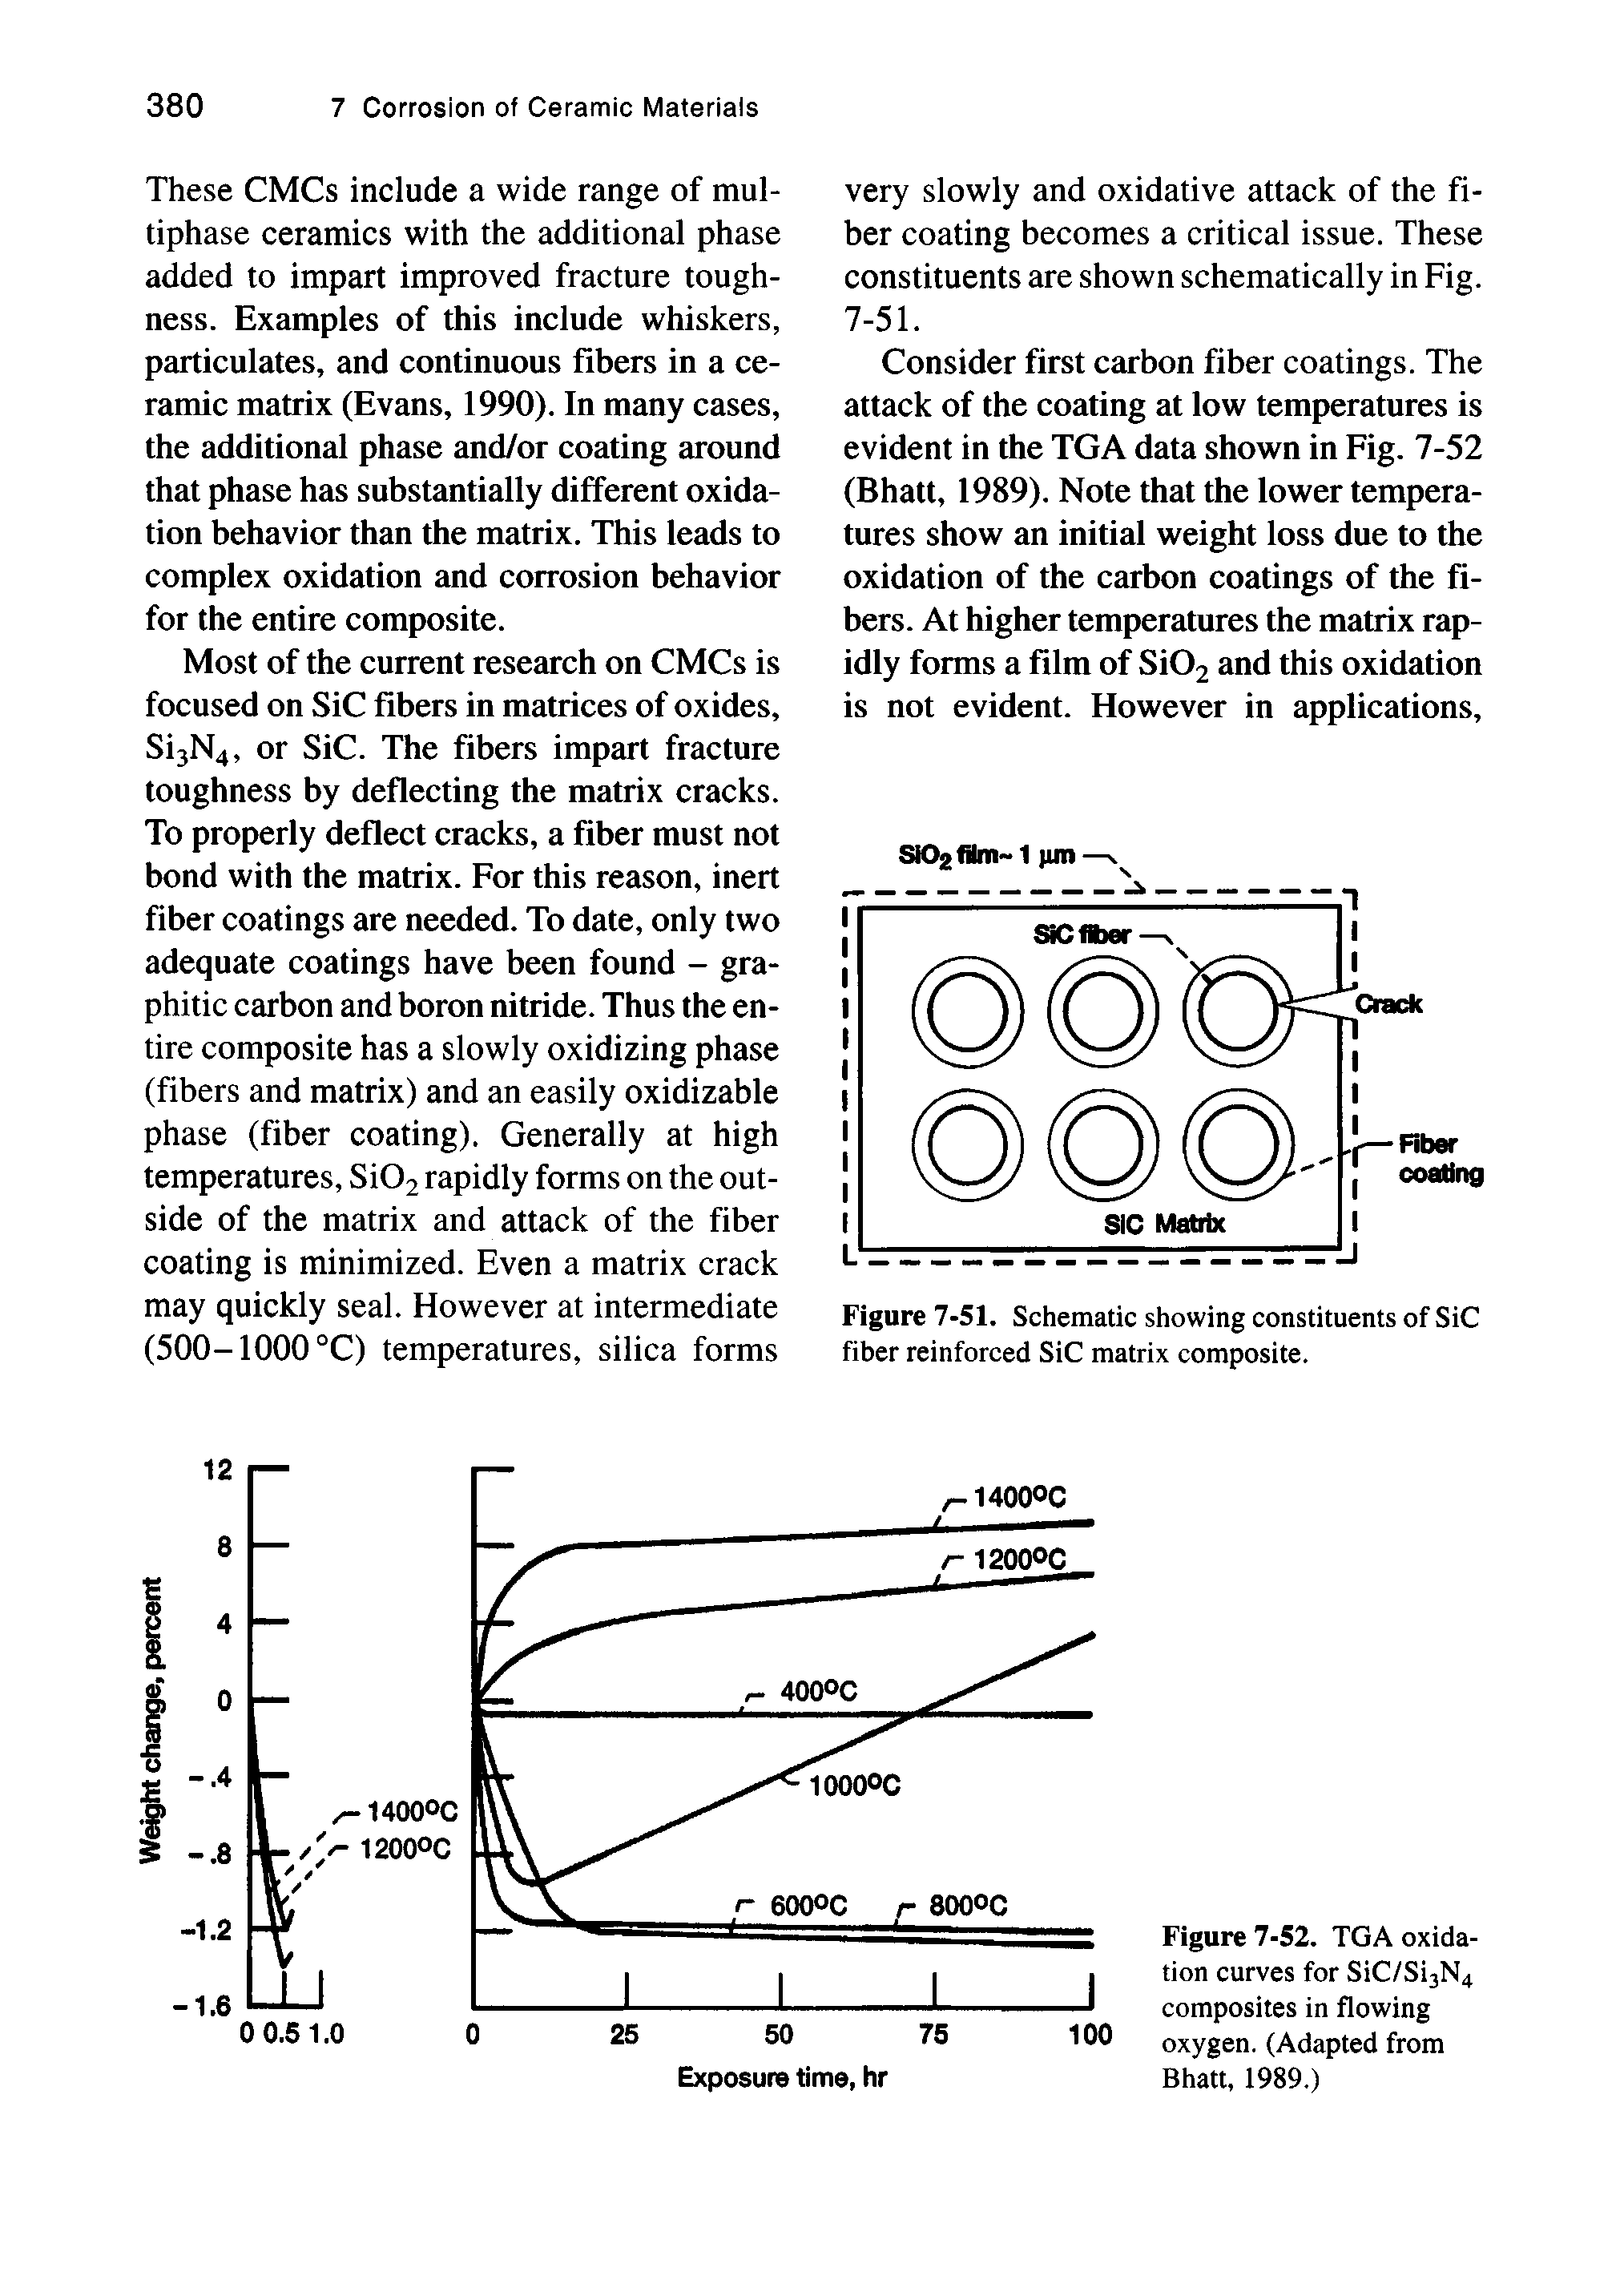 Figure 7-52. TGA oxidation curves for SiC/Si3N4 composites in flowing oxygen. (Adapted from Bhatt, 1989.)...